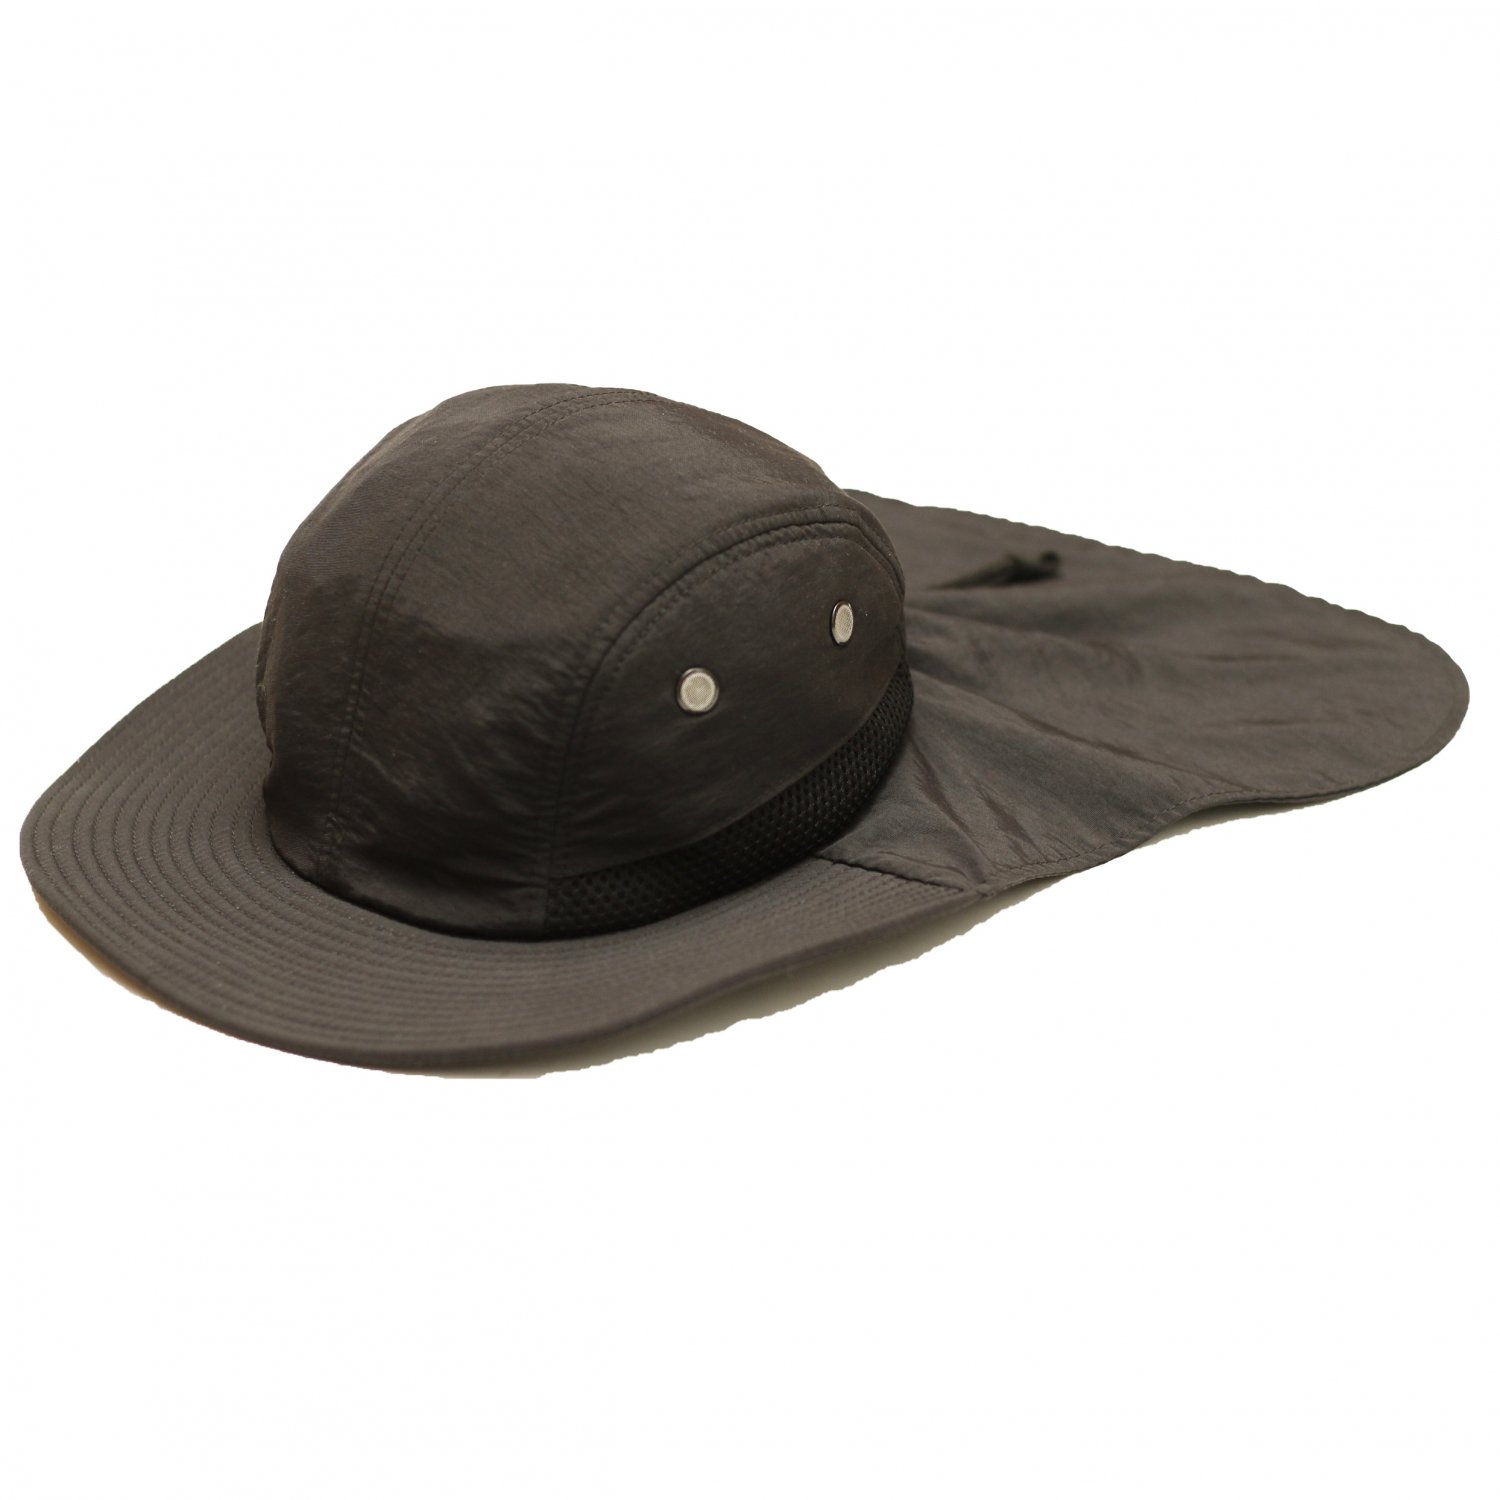 <img class='new_mark_img1' src='https://img.shop-pro.jp/img/new/icons8.gif' style='border:none;display:inline;margin:0px;padding:0px;width:auto;' />MILITARY / Sun Cap Hat